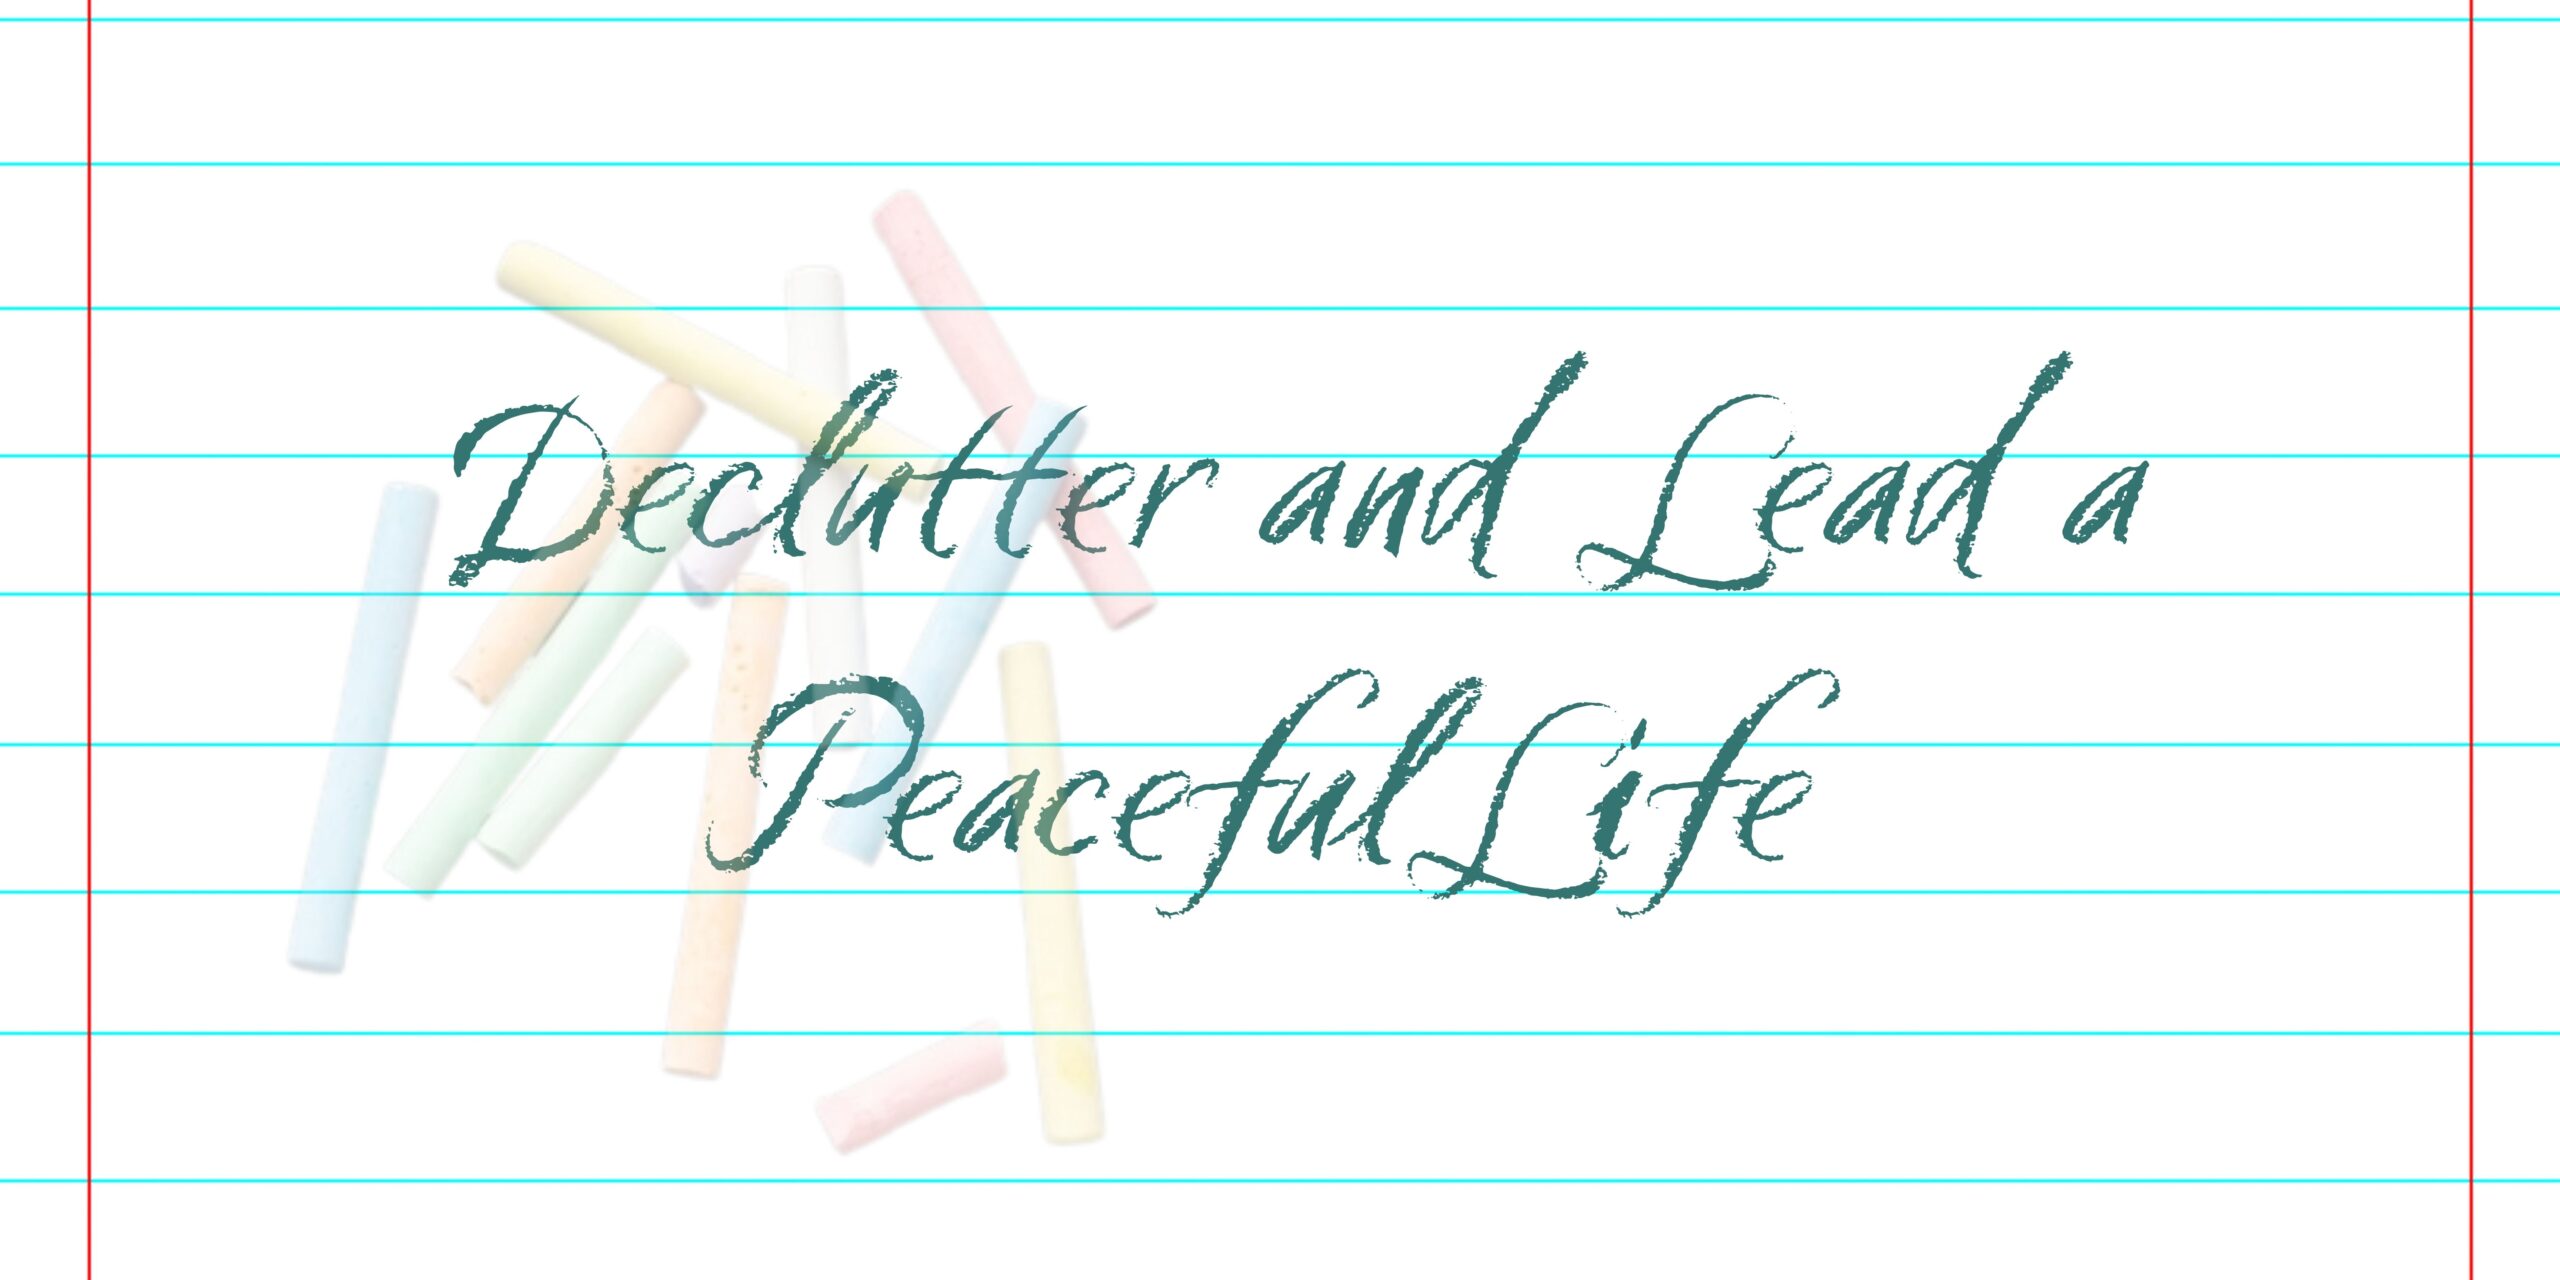 How to declutter and lead a peaceful life?